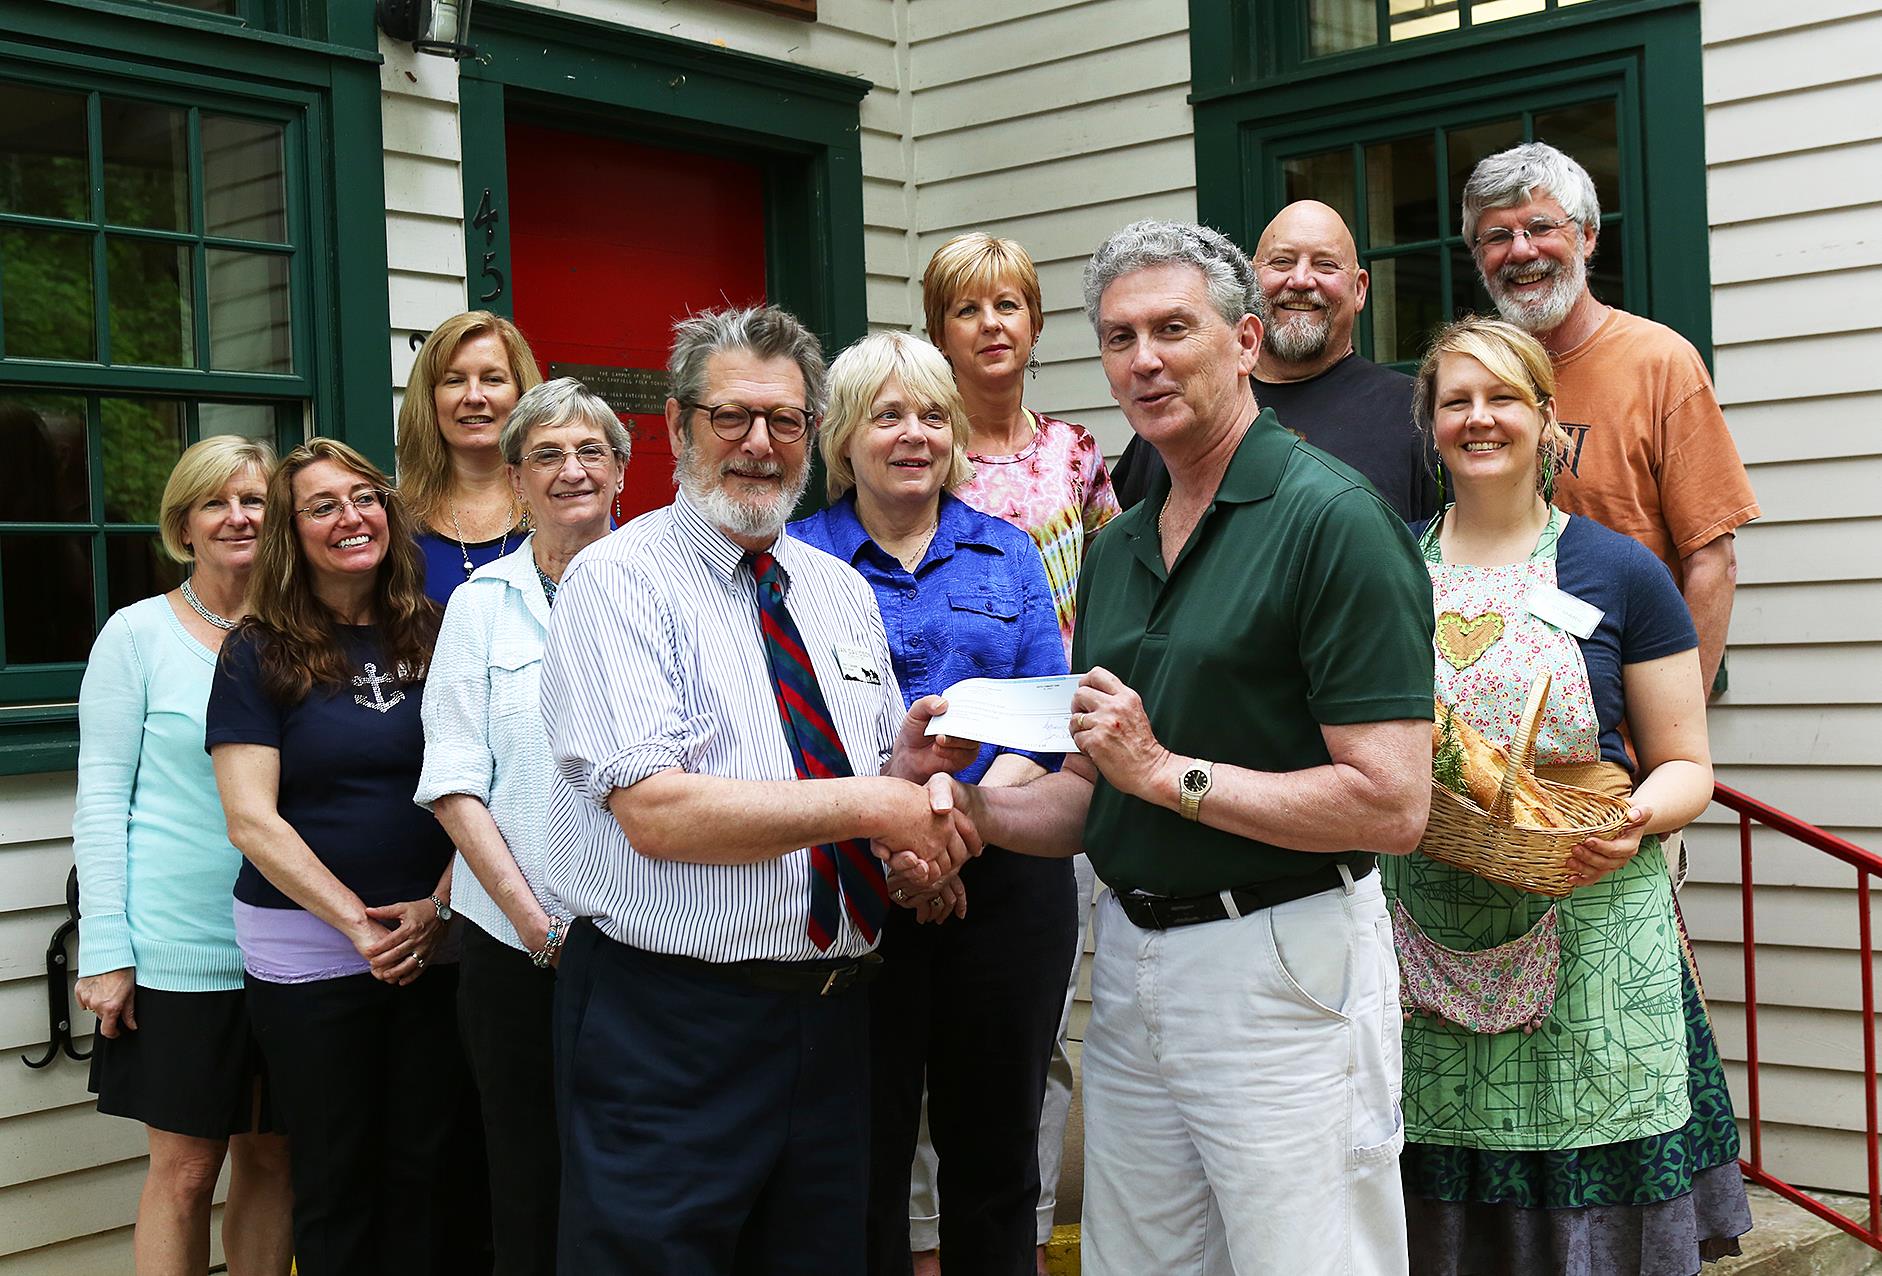 On May 10, 2016, the staff of John C. Campbell Folk School and Empty Bowls volunteers presented a check for $3,188 to Robert Merrill, President of Cherokee County Sharing Center. The Center provides food for over 400 families each month, 30% who are children. Presenting the check, Folk School Director Jan Davidson and Robert Merrill. Also pictured from left to right: Kate Delong, Ellen Sandor, Jennifer Slucher, Dianne Arnold, Marianne Hatchett, Colleen Plonsky, Mike Lalone, Cory Marie Podielski, and Harry Hearne. The Empty Bowls fundraiser for Cherokee and Clay County food banks has been organized by Resident Potter Mike Lalone and hosted by the John C. Campbell Folk School for the past 10 years.